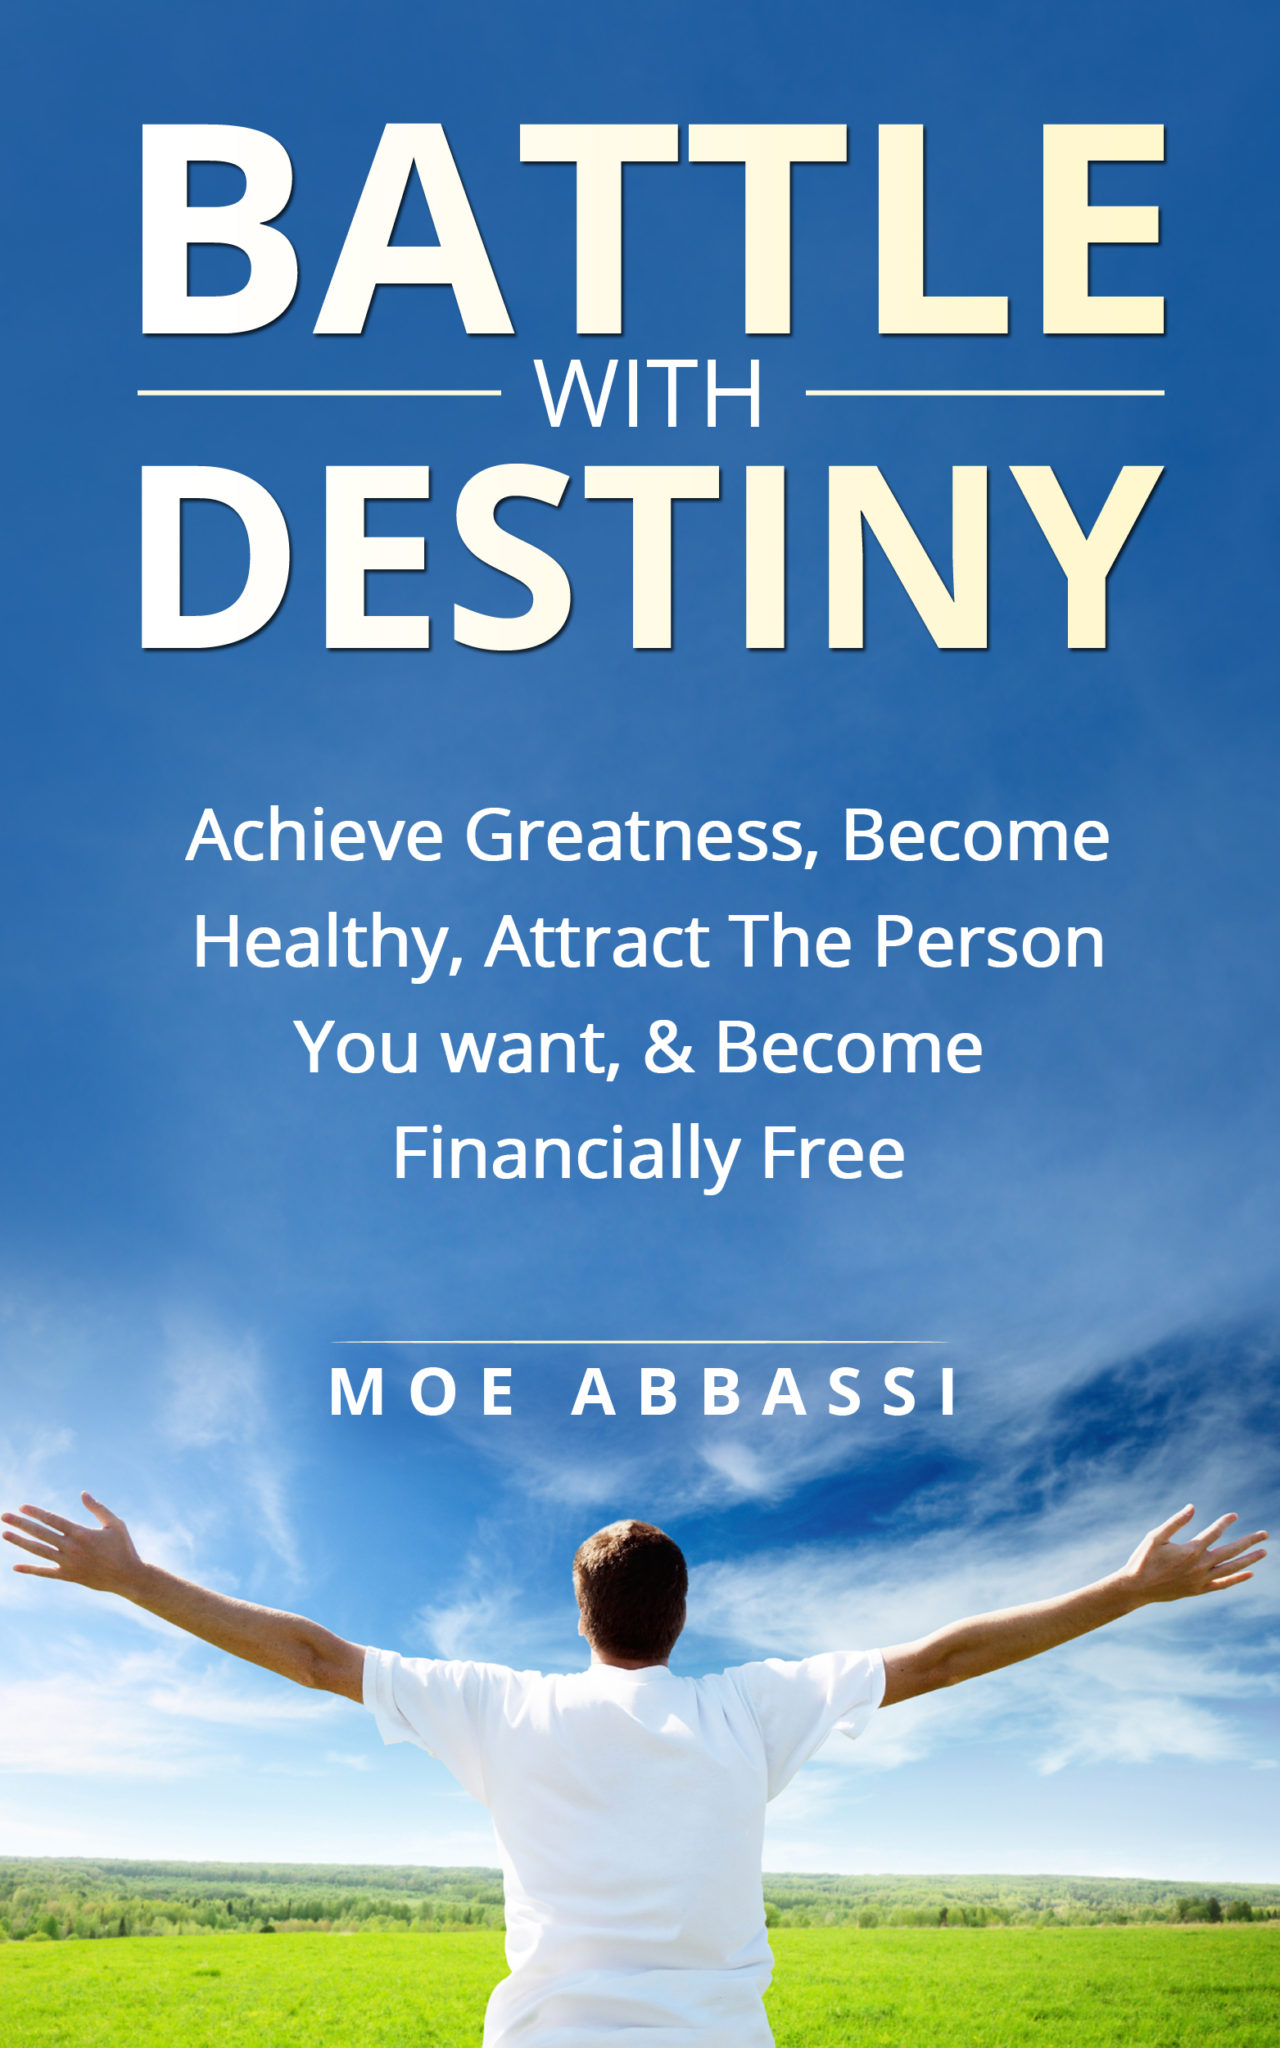 The Battle With Destiny: How to Achieve Greatness, Success, & Happiness by Moe Abbassi